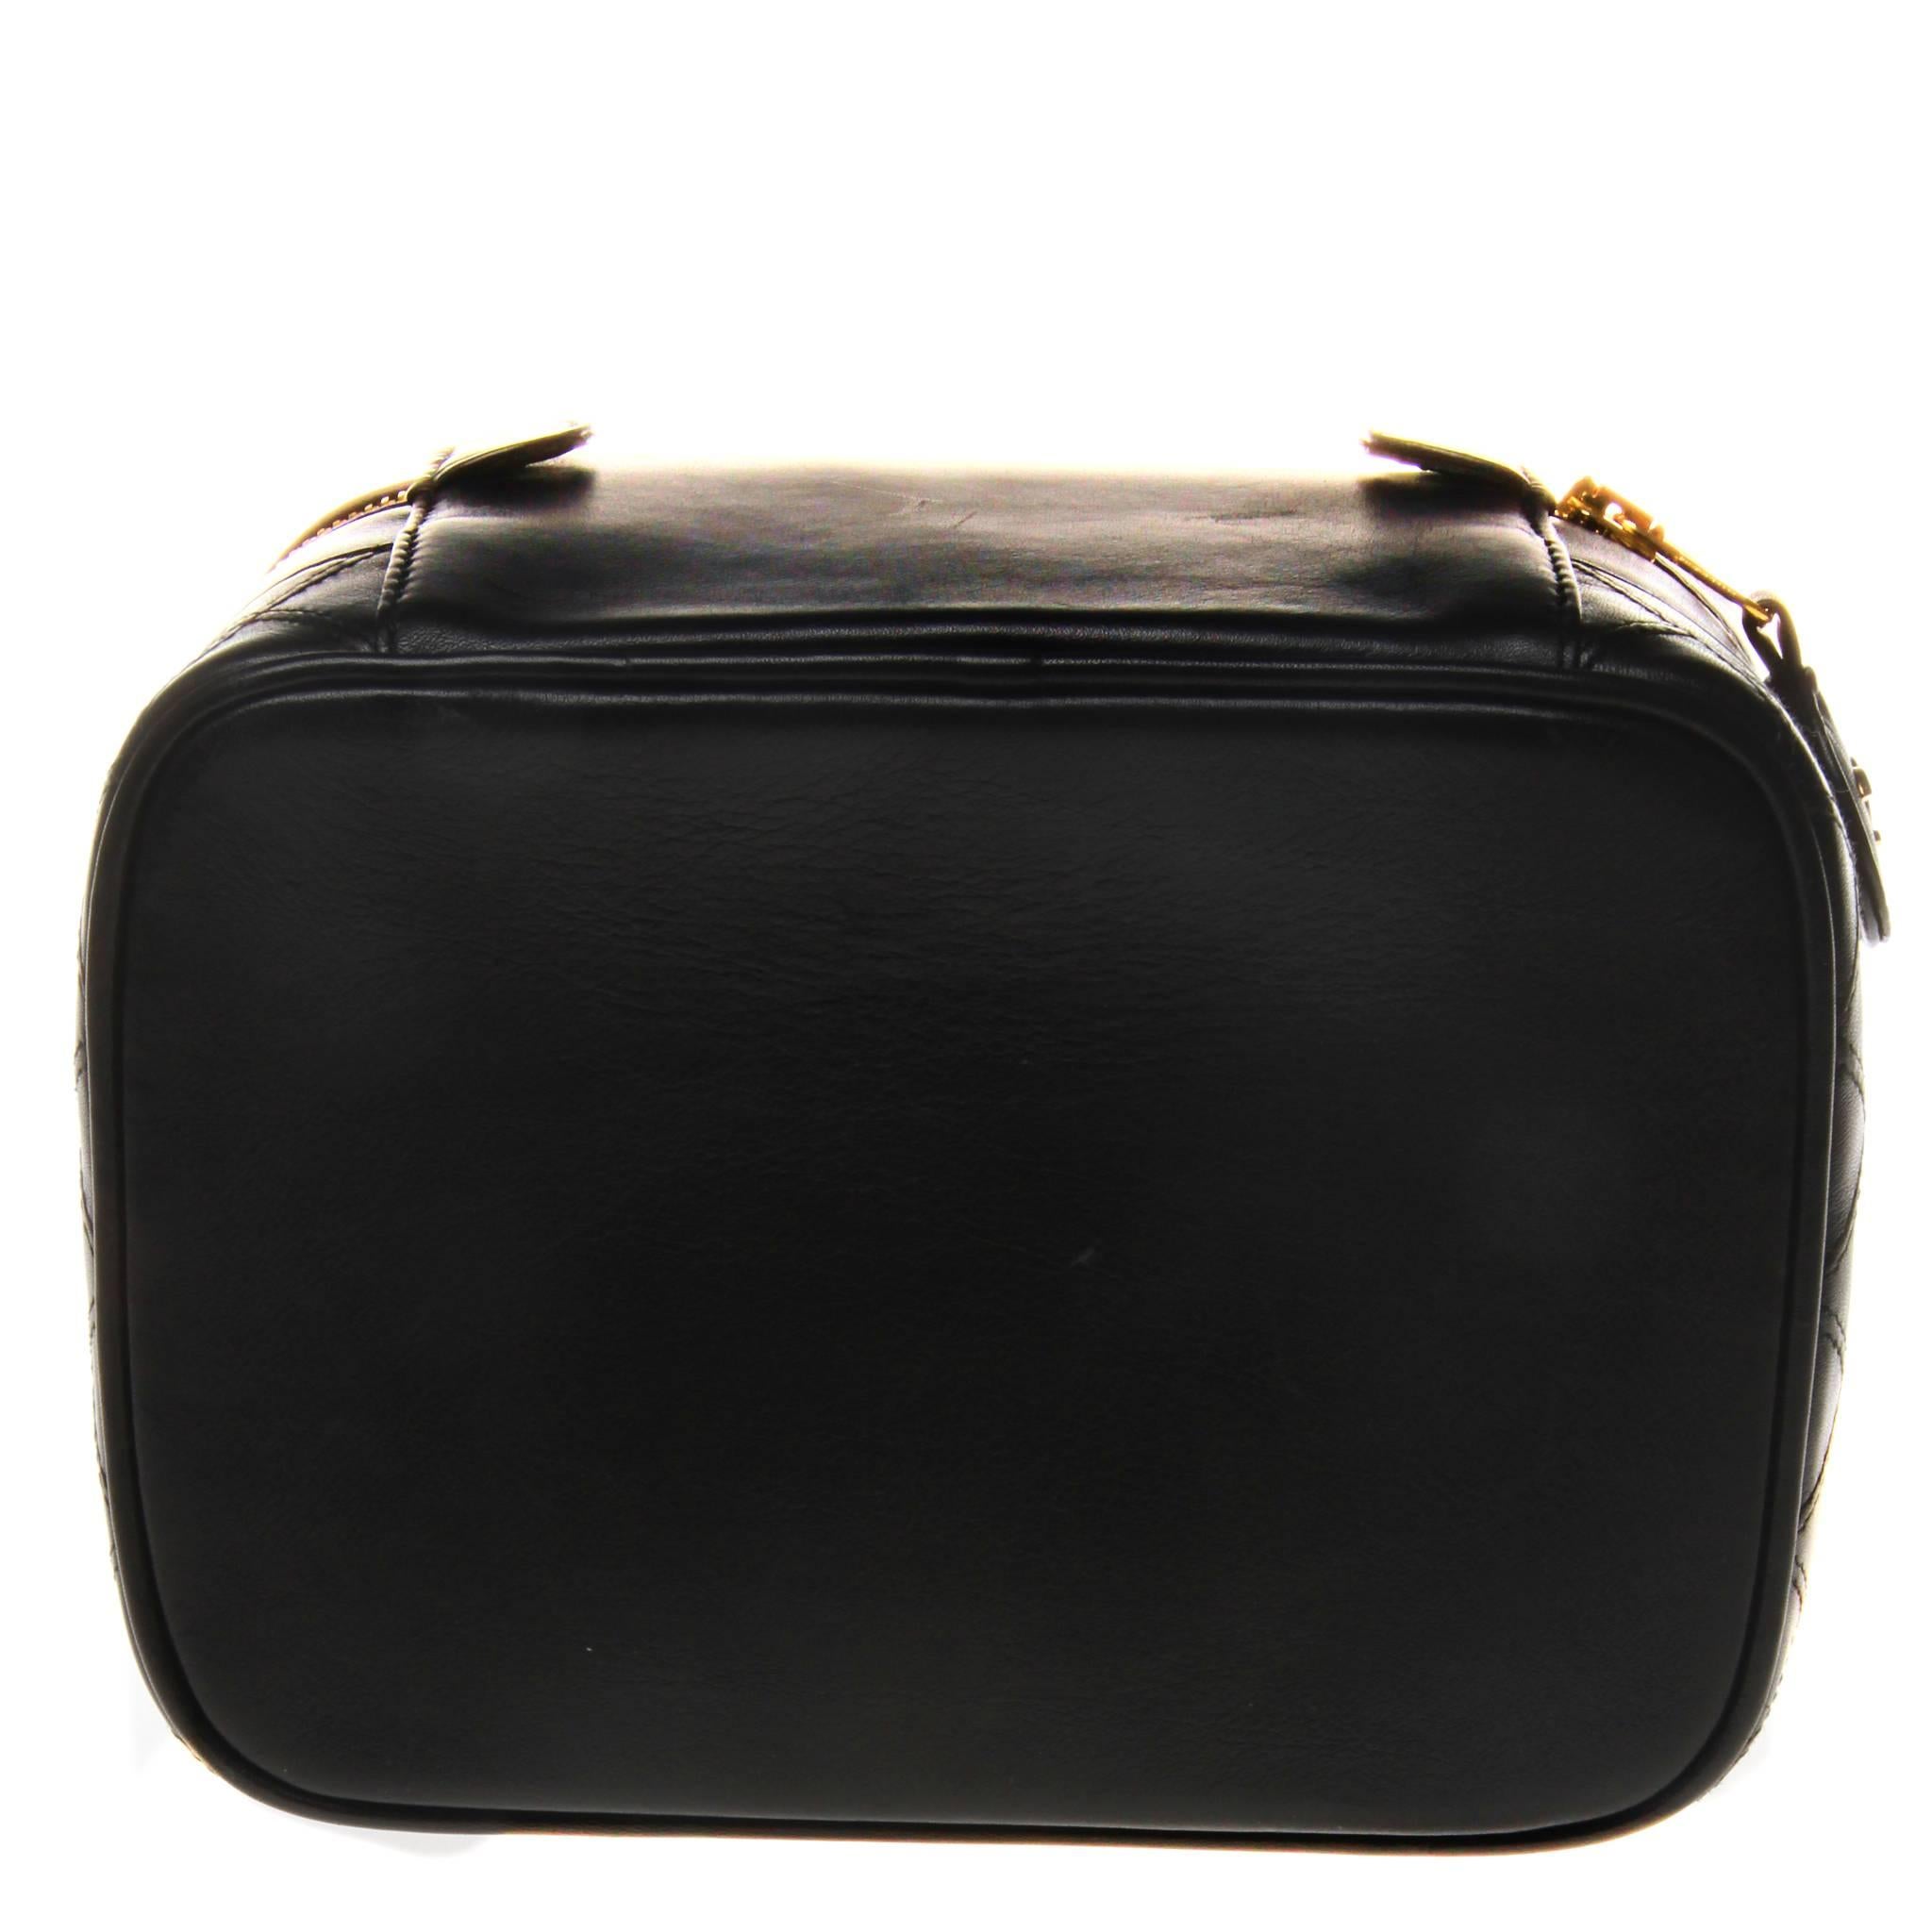  Vintage Chanel lambskin leather vanity make up case circa mid 1990s (1994-96).
In lovely condition This make up bag is in the classic upright style with small handle. The bag has a classic gold zipper closure that zips all the way around to the